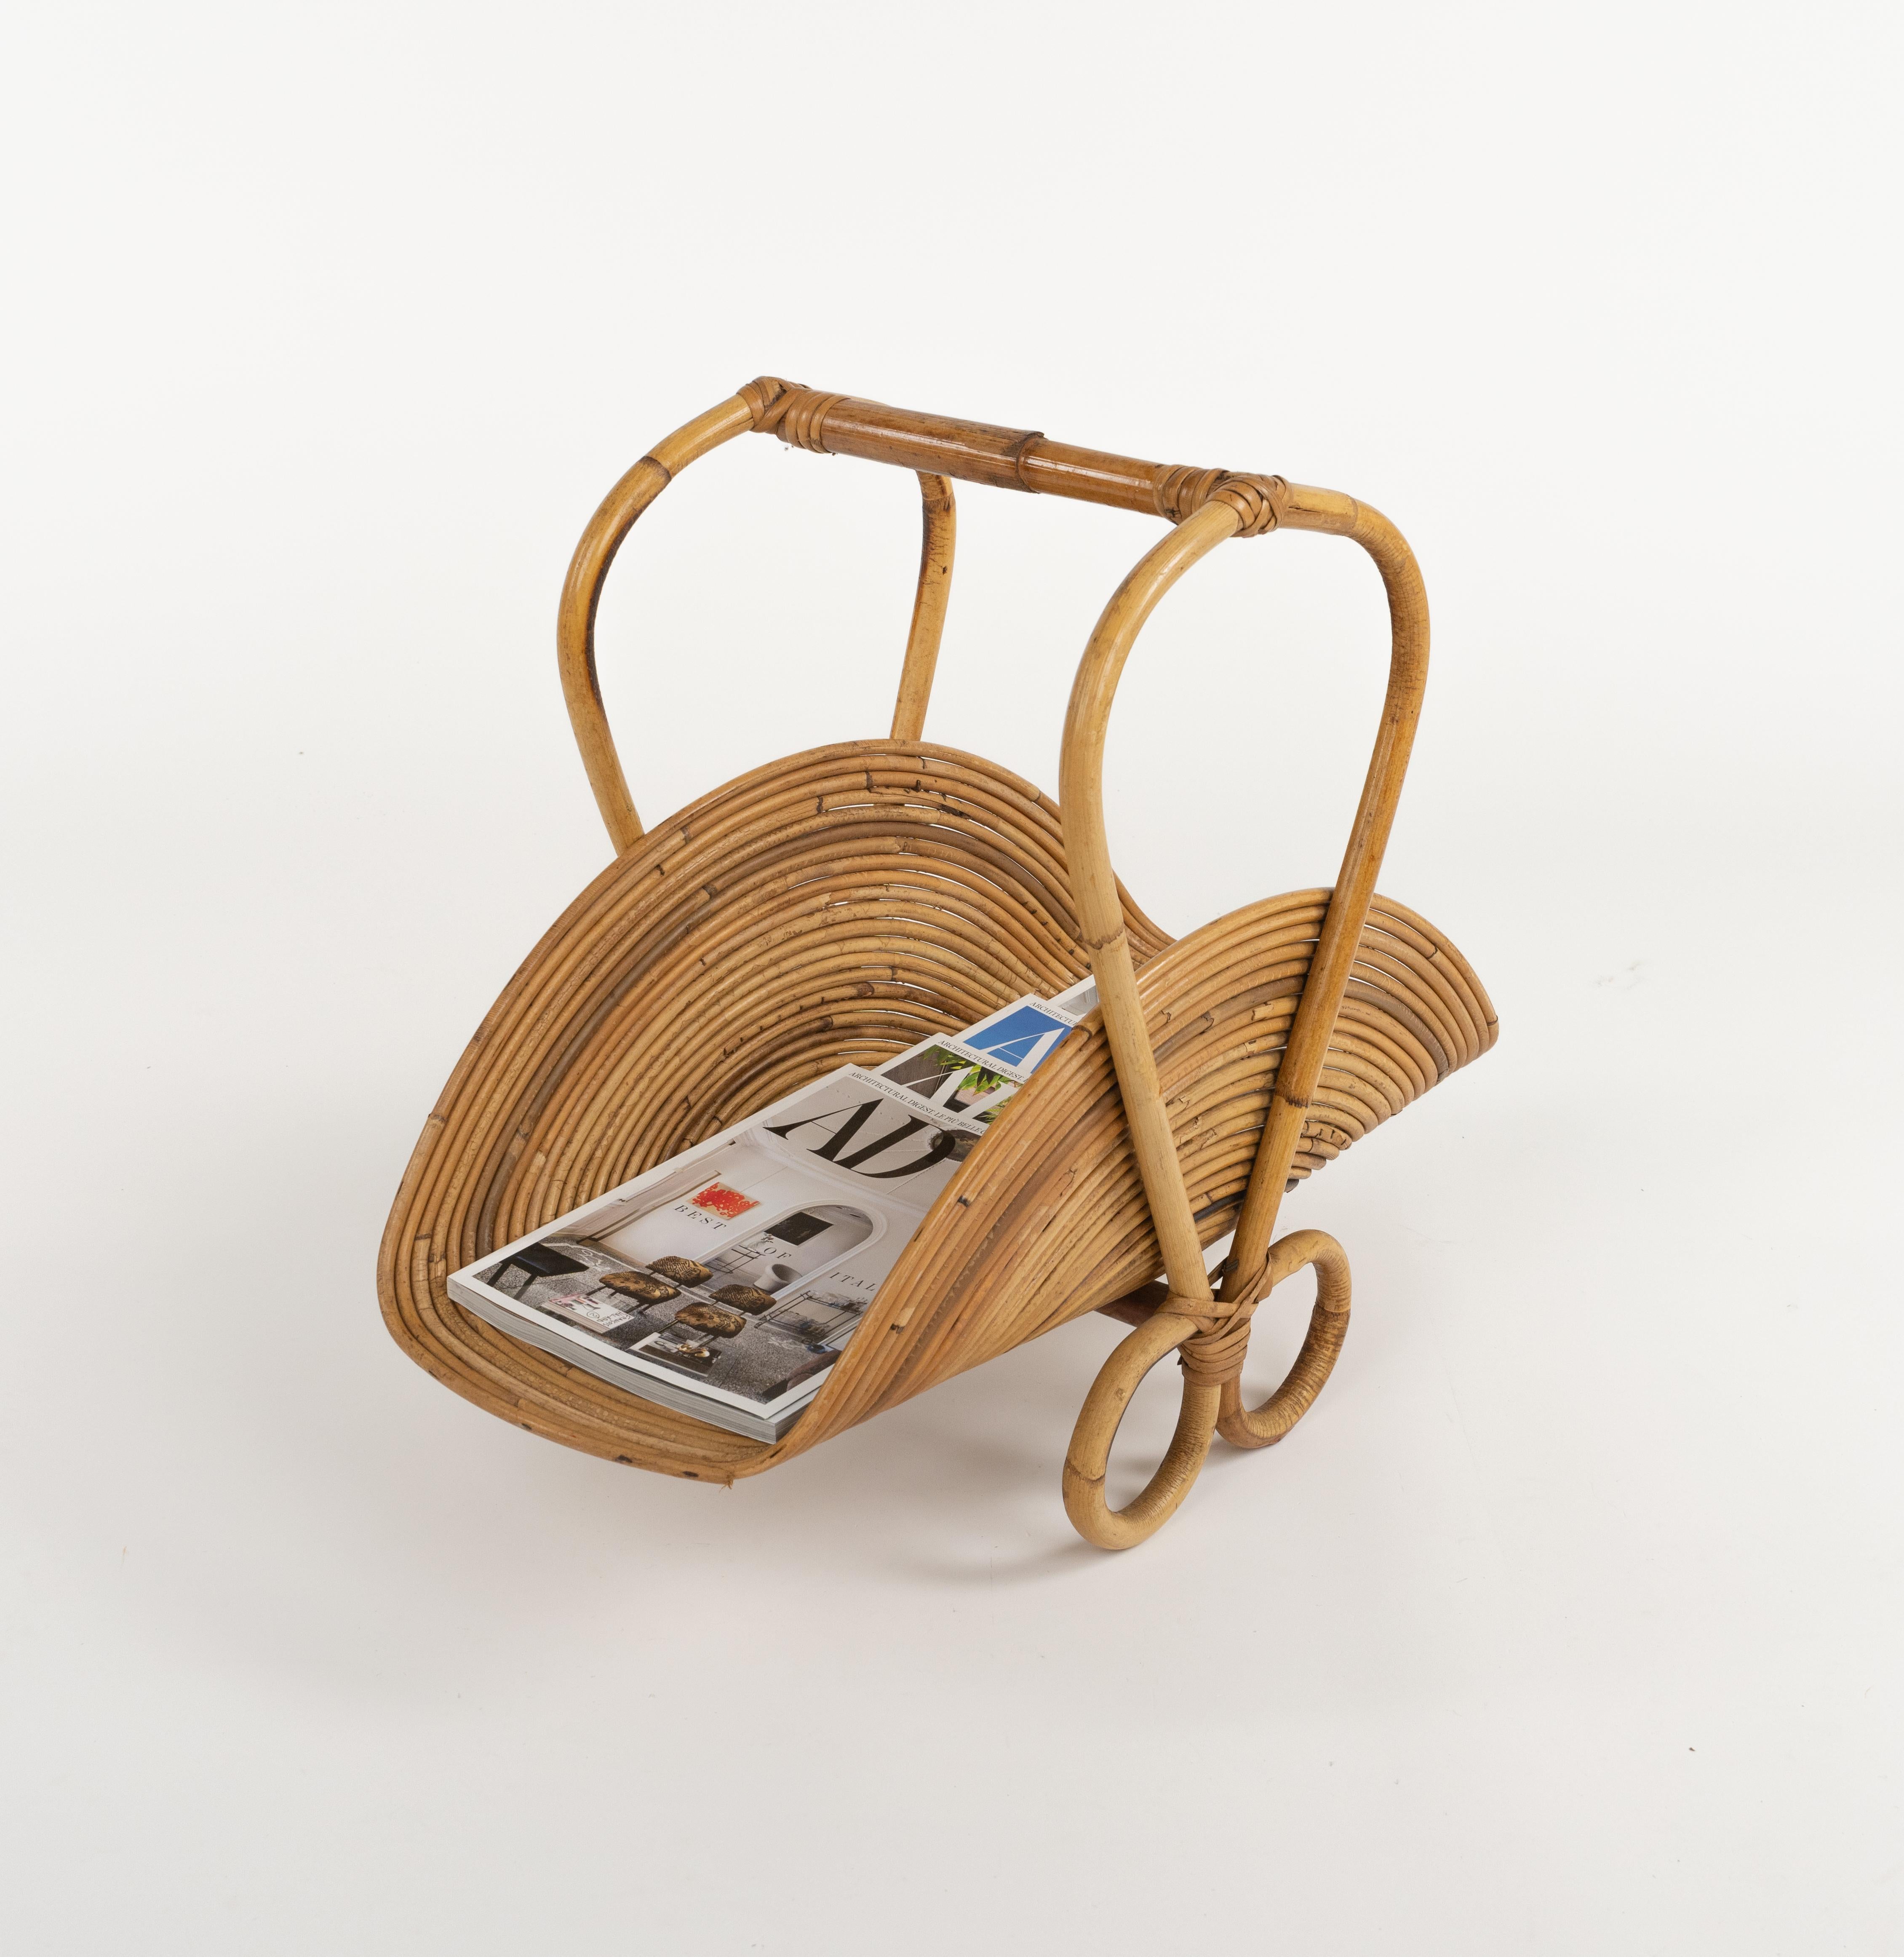 Midcentury Bamboo and Rattan Magazine Rack Vivai Del Sud Style, Italy 1960s For Sale 4